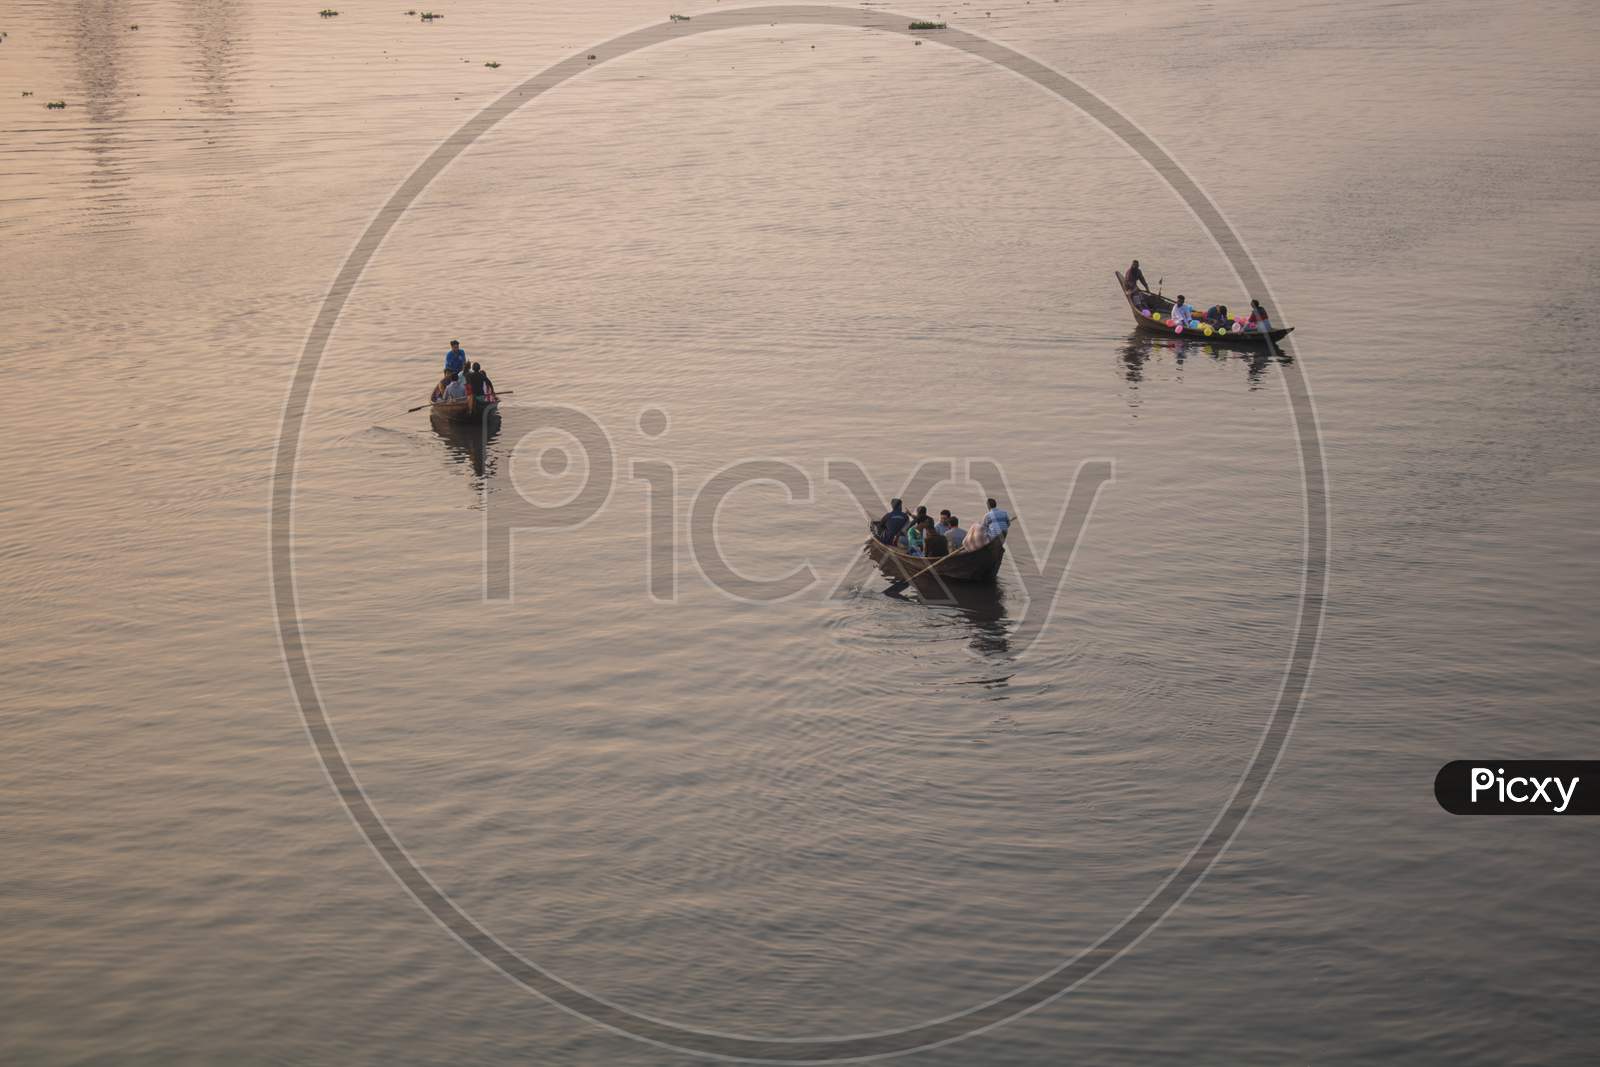 The Boat Is Floating In The Golden Light Of The Afternoon. This Is A View Of The River Buriganga In Bangladesh.